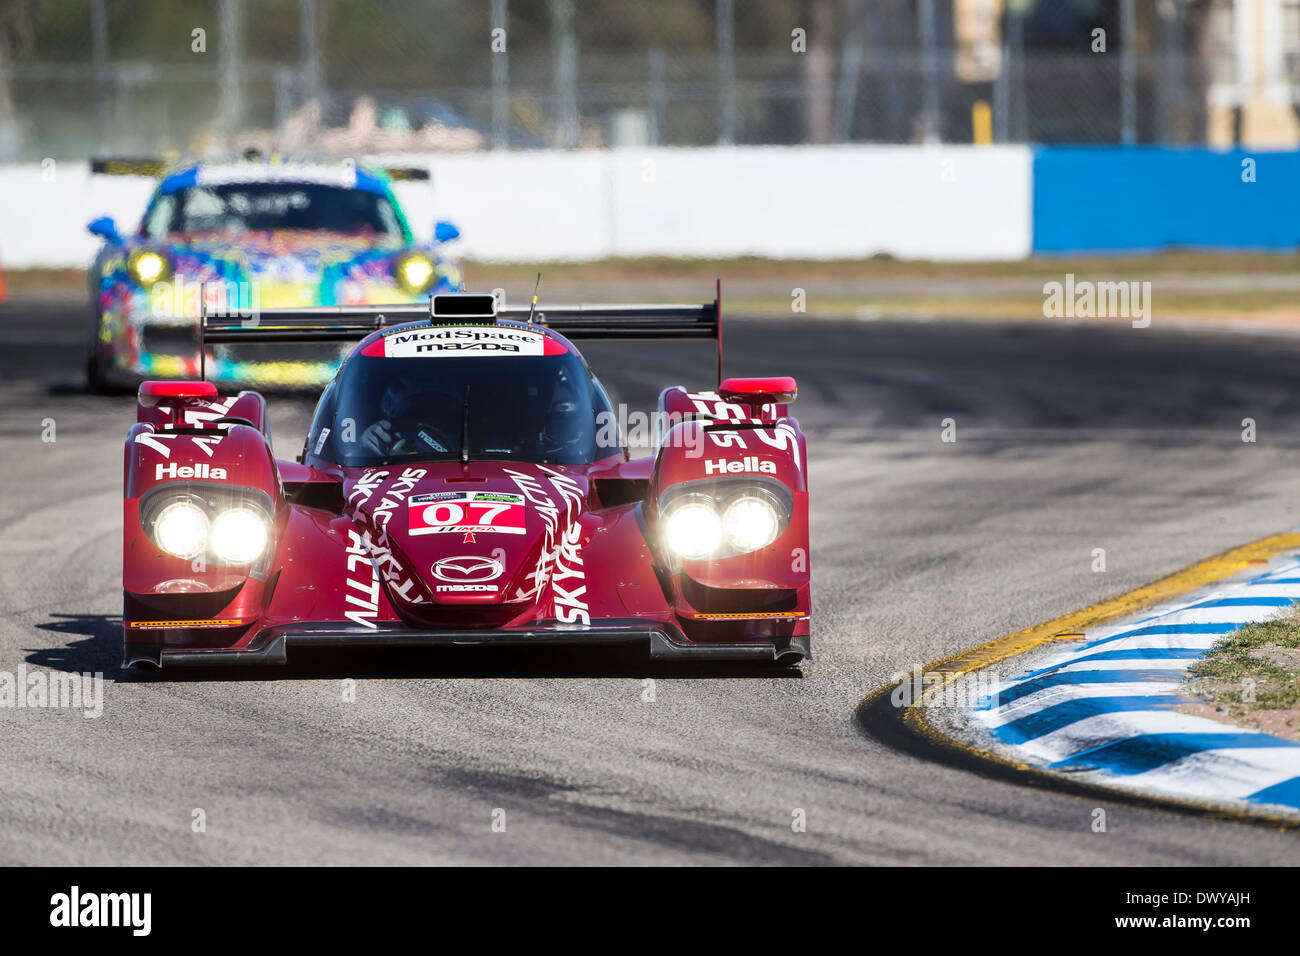 Sebring, FL, USA. 14th Mar, 2014. Sebring, FL - Mar 14, 2014: The Speedsource Mazda takes to the track on Continental tires for a practice session for the 12 Hours of Sebring at Sebring International Raceway in Sebring, FL. Credit:  csm/Alamy Live News Stock Photo